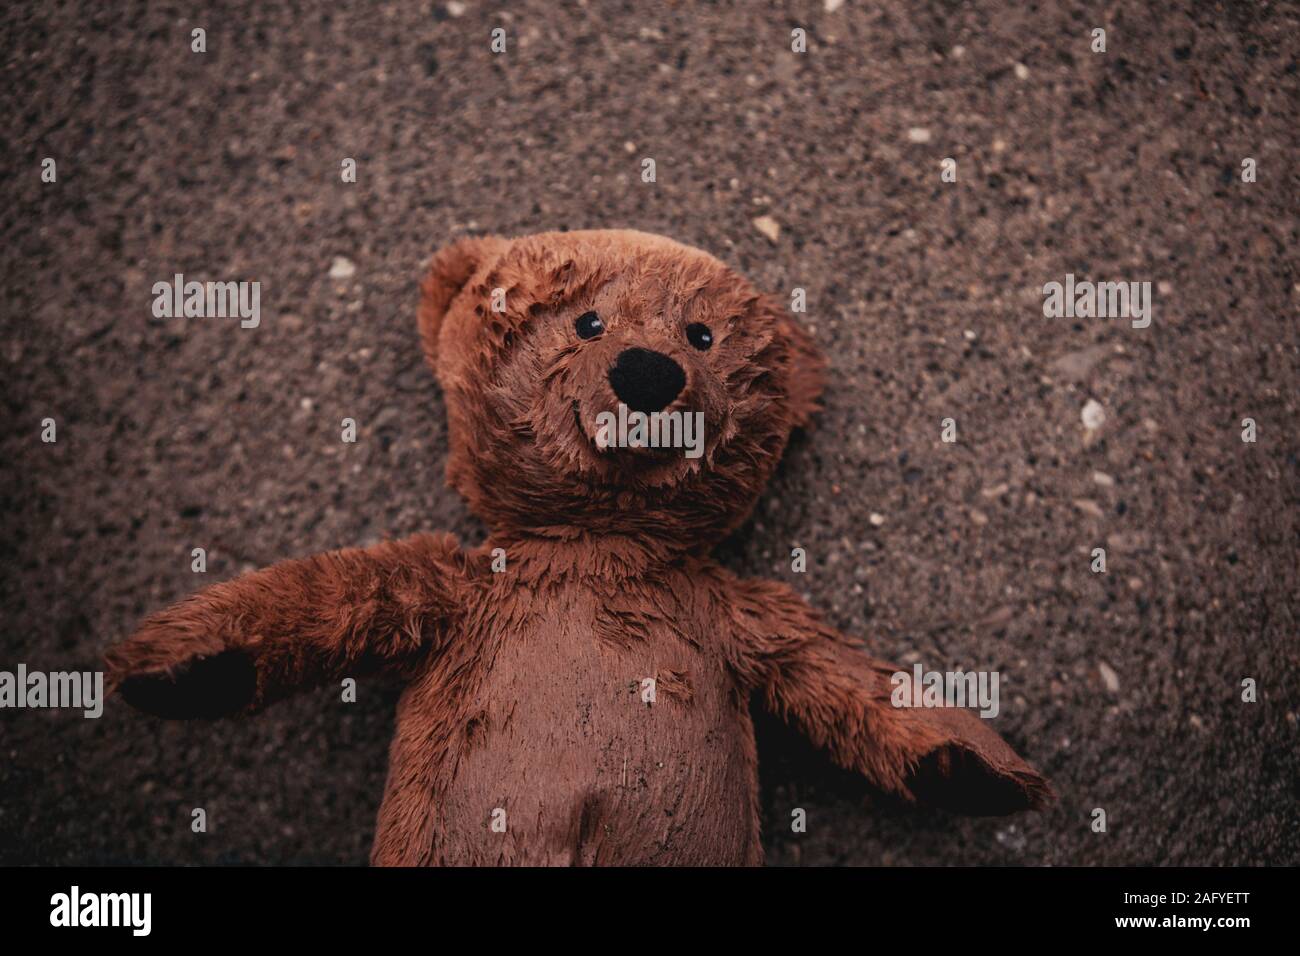 teddy bear fell in a puddle Stock Photo